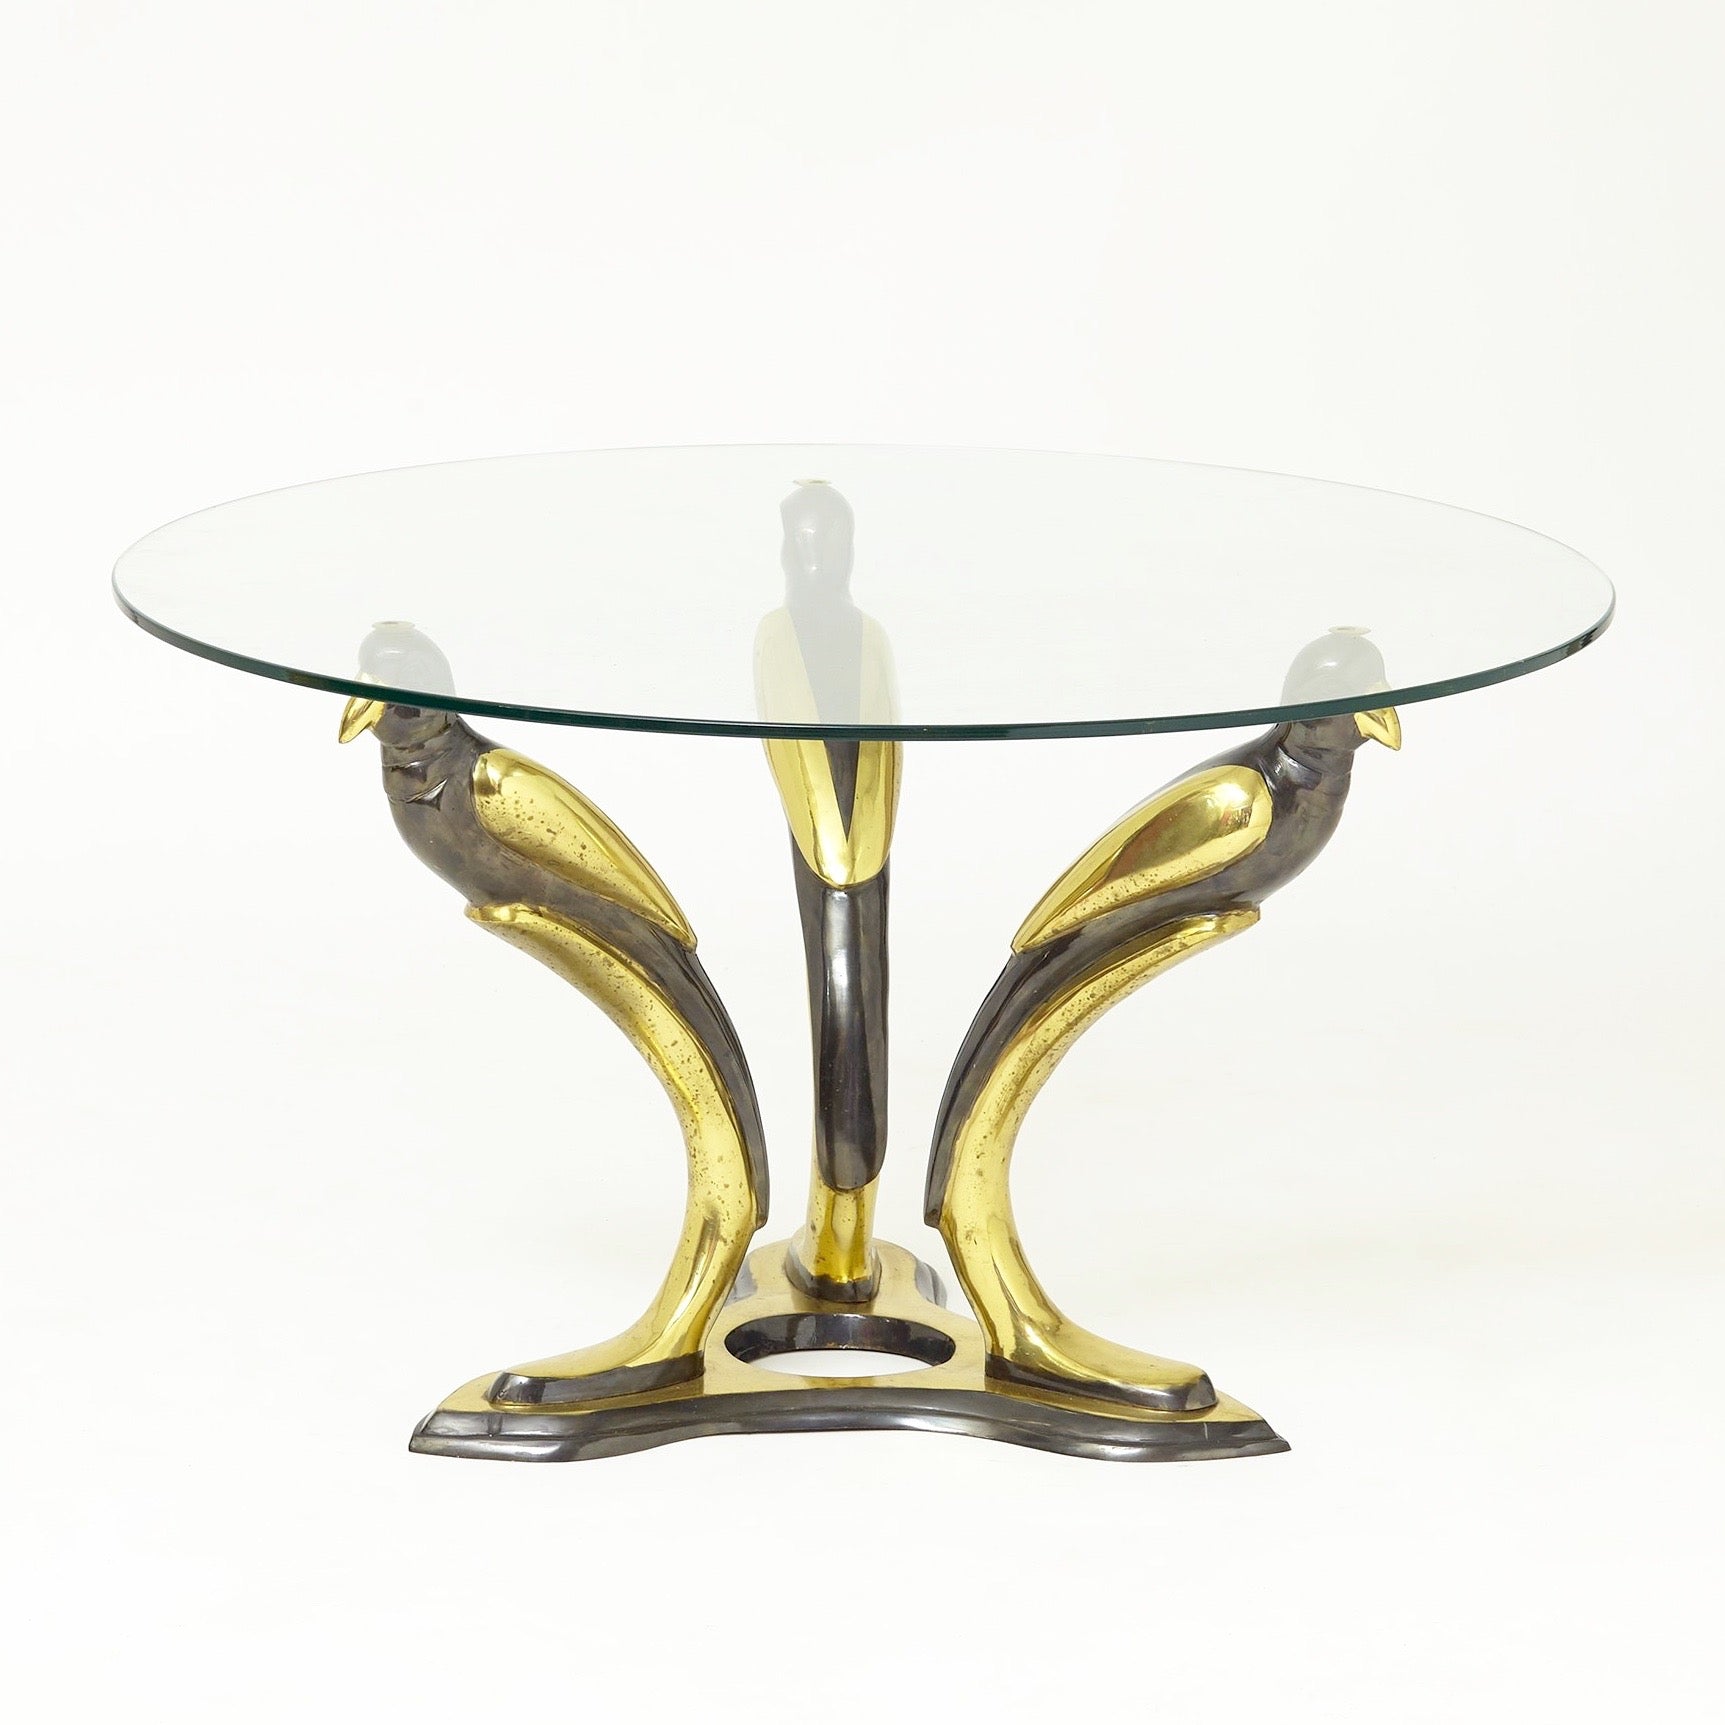 Patinated bronze 'bird'  coffee table in the style of Willy Daro.